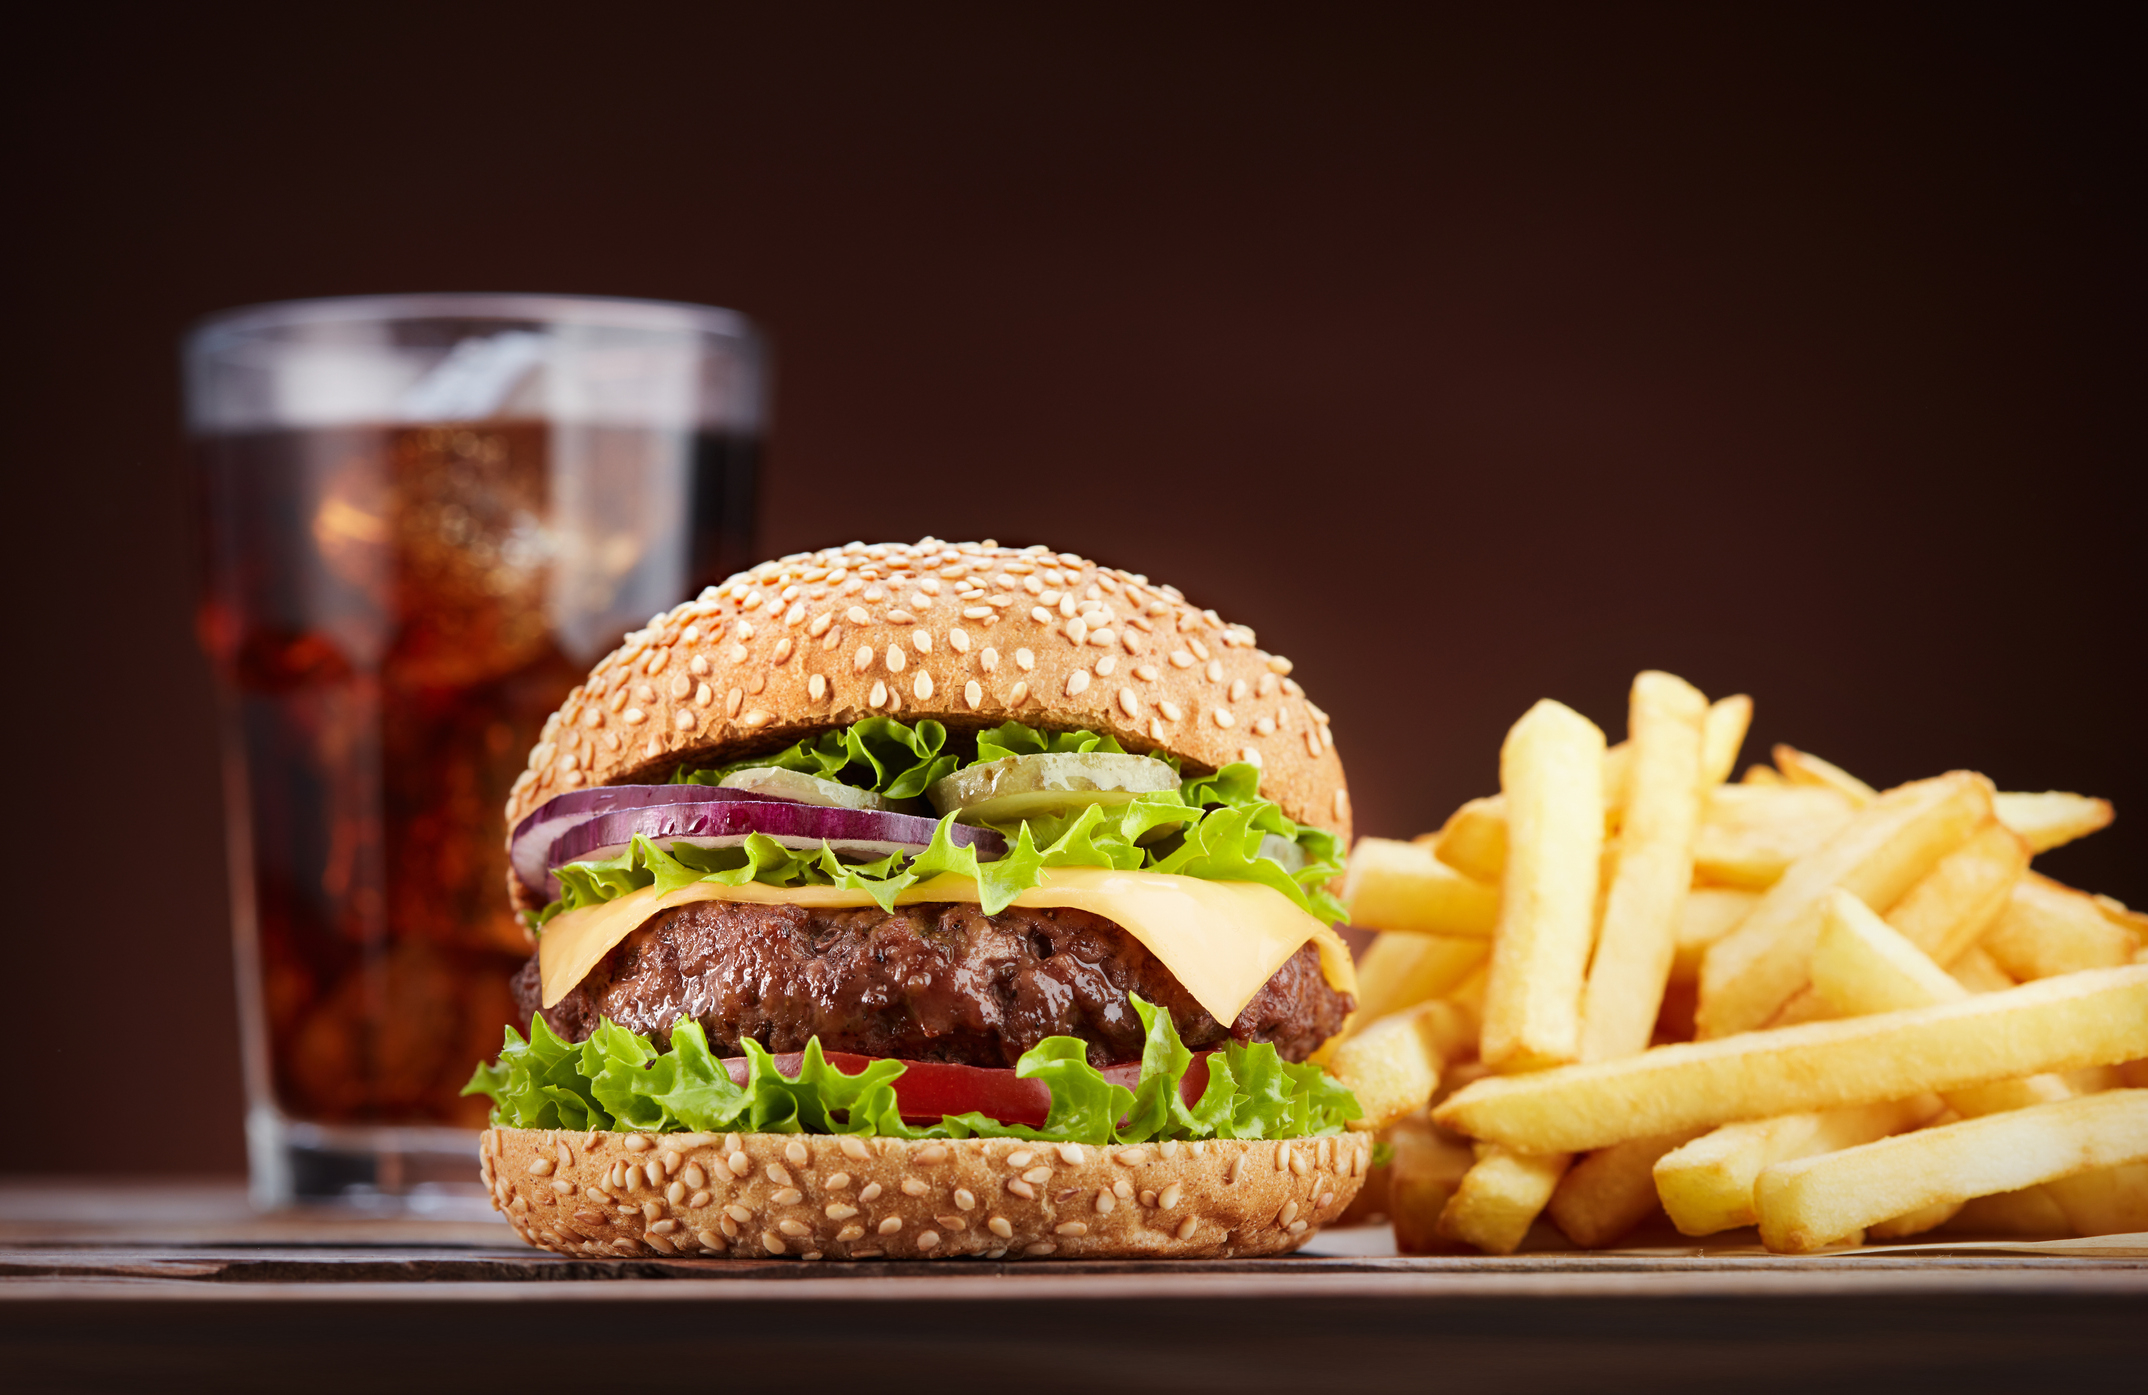 Cheeseburger with lettuce, tomato, and onion, alongside fries and a soft drink